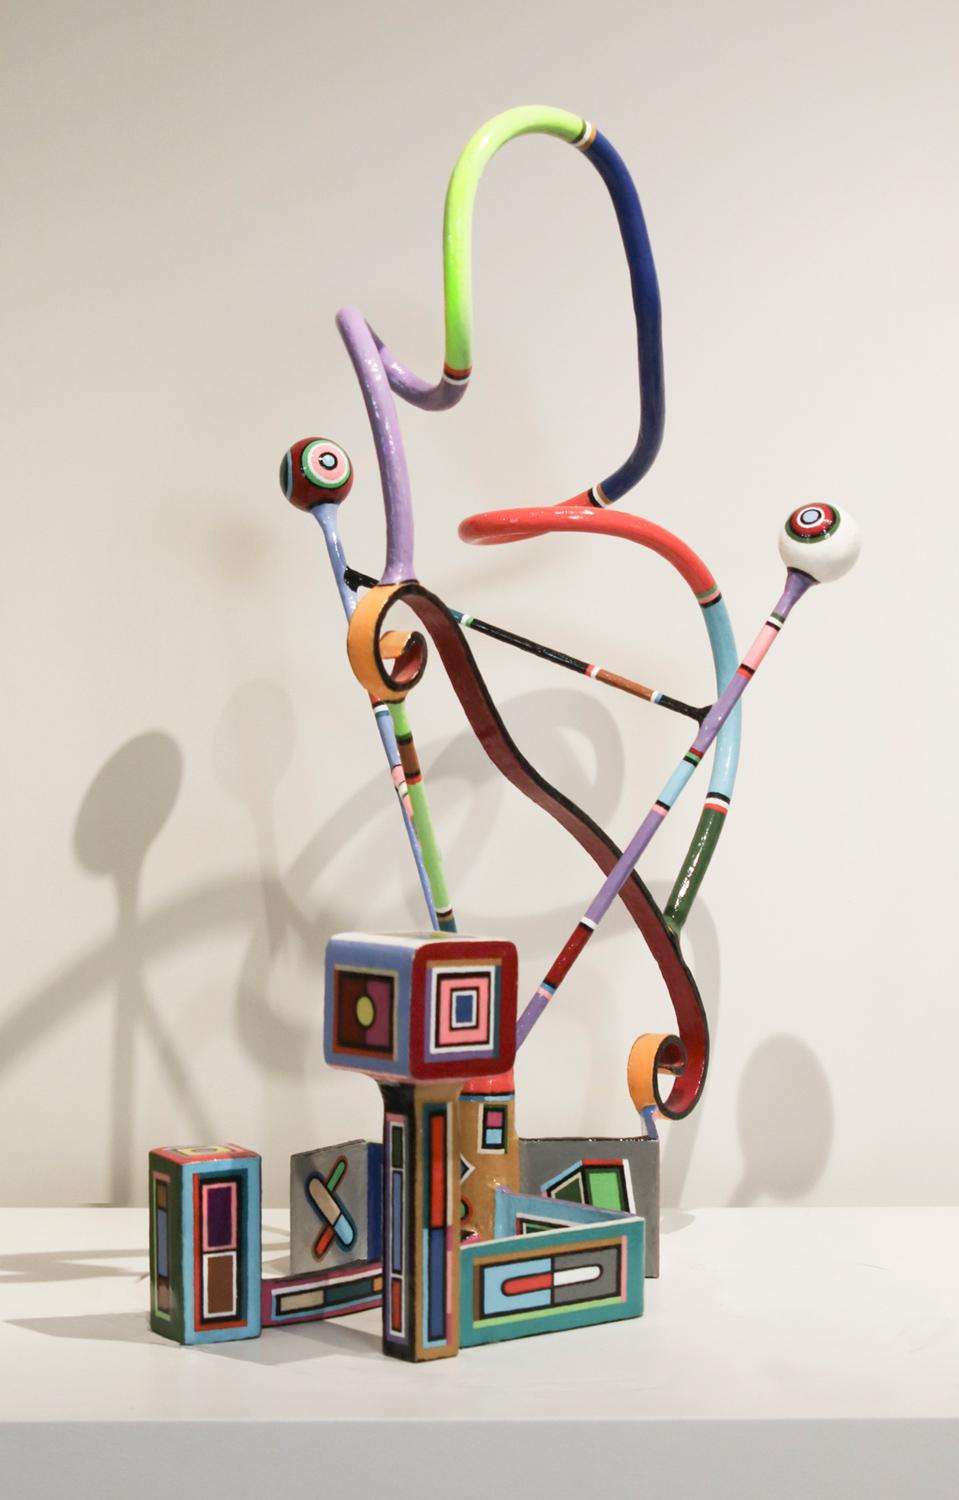 Playful and colorful steel pedestal sculpture with acrylic lacquer paint.

California-based sculptor Joseph Slusky says of his work: 